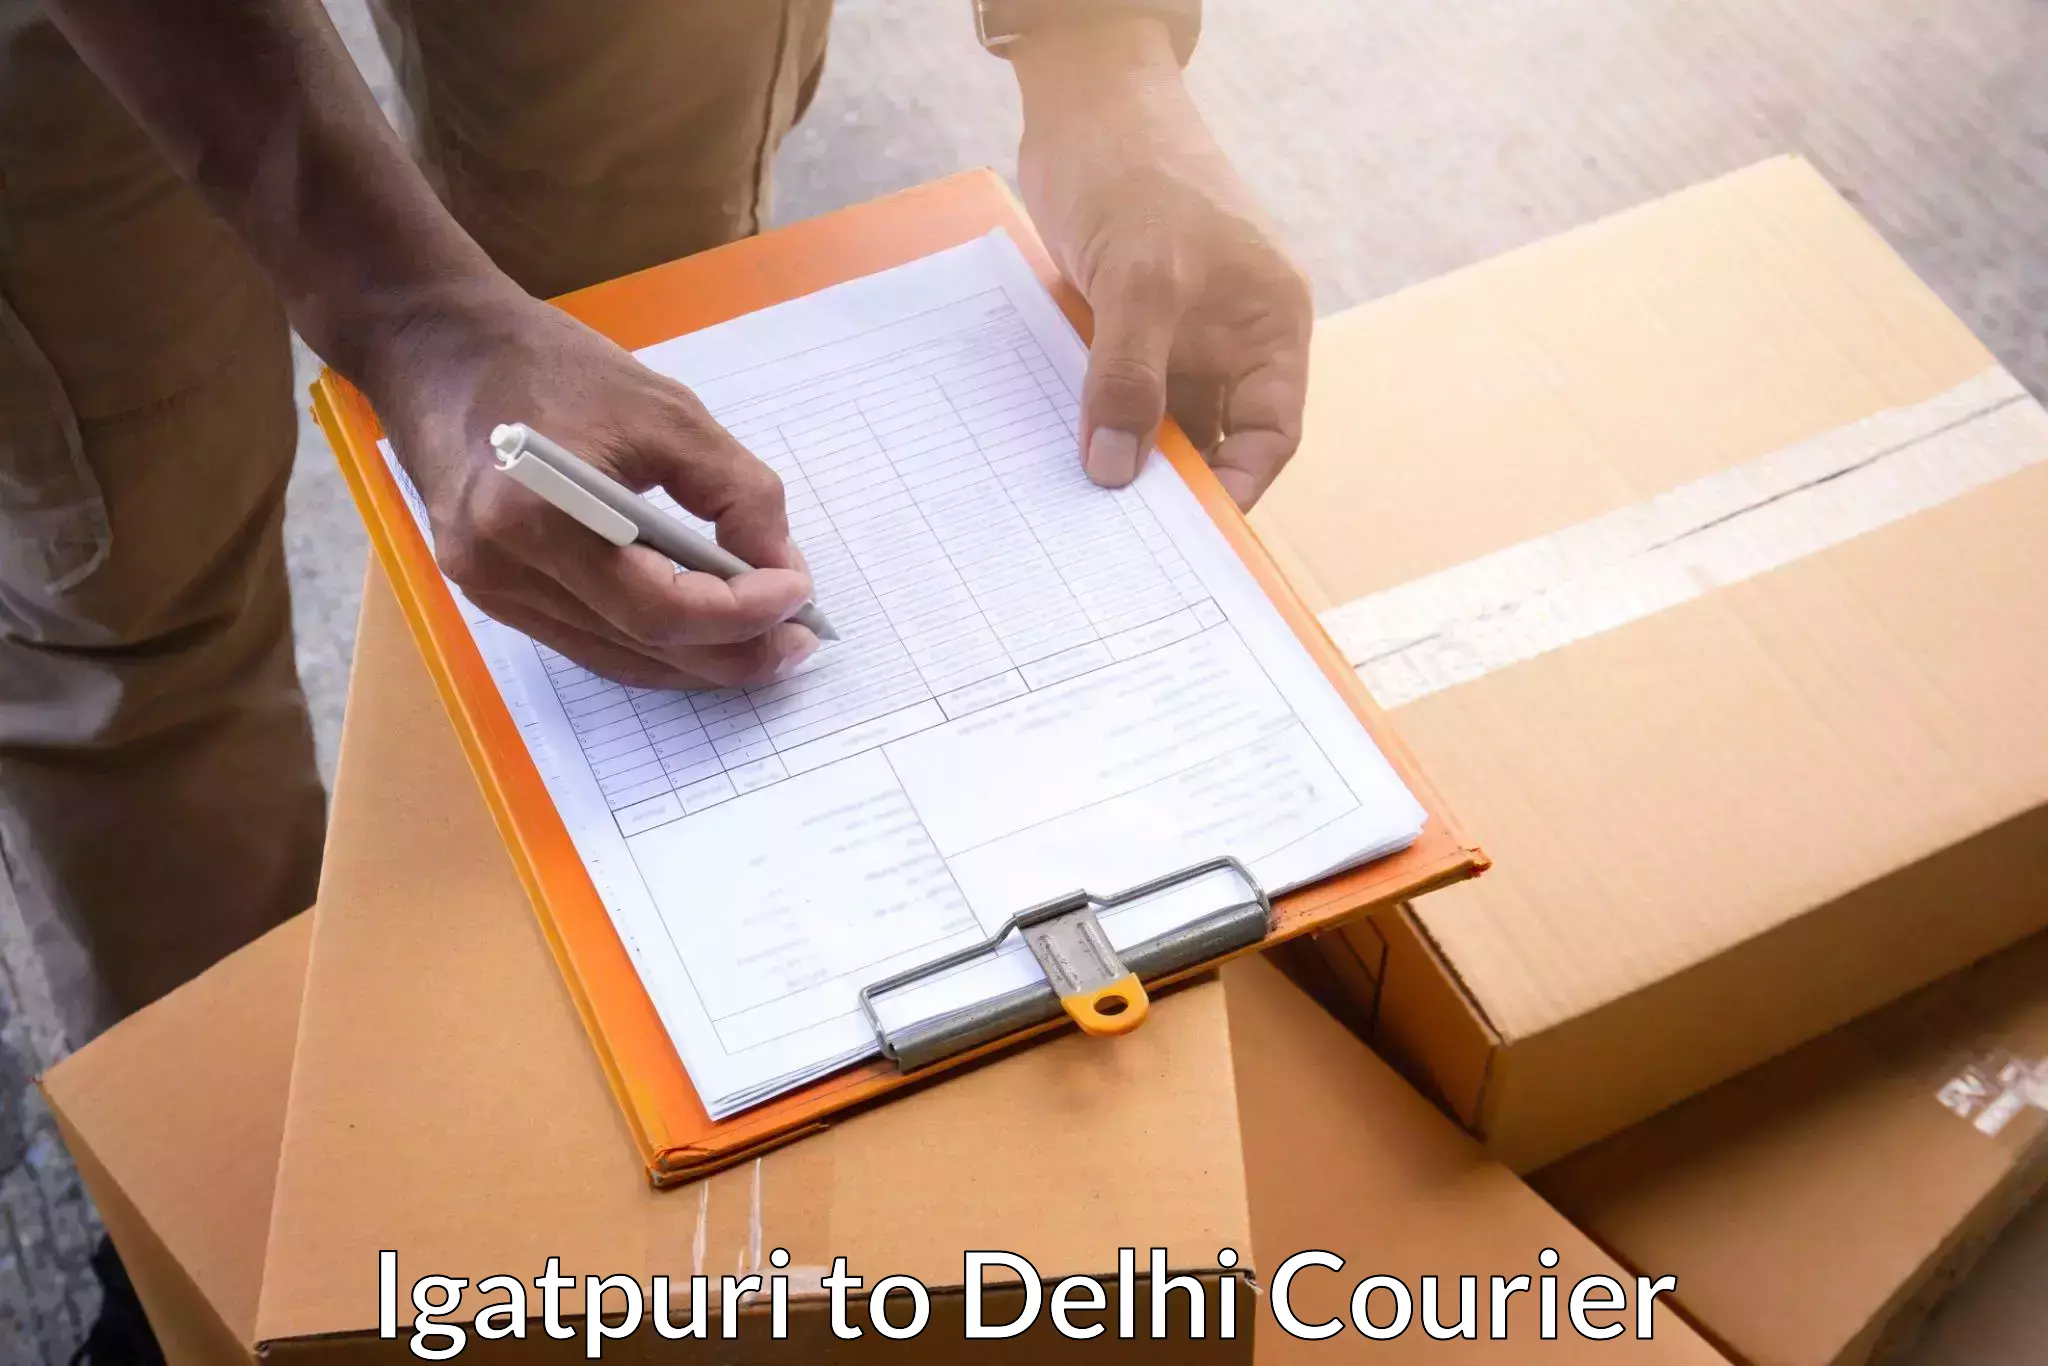 Professional parcel services Igatpuri to Lodhi Road